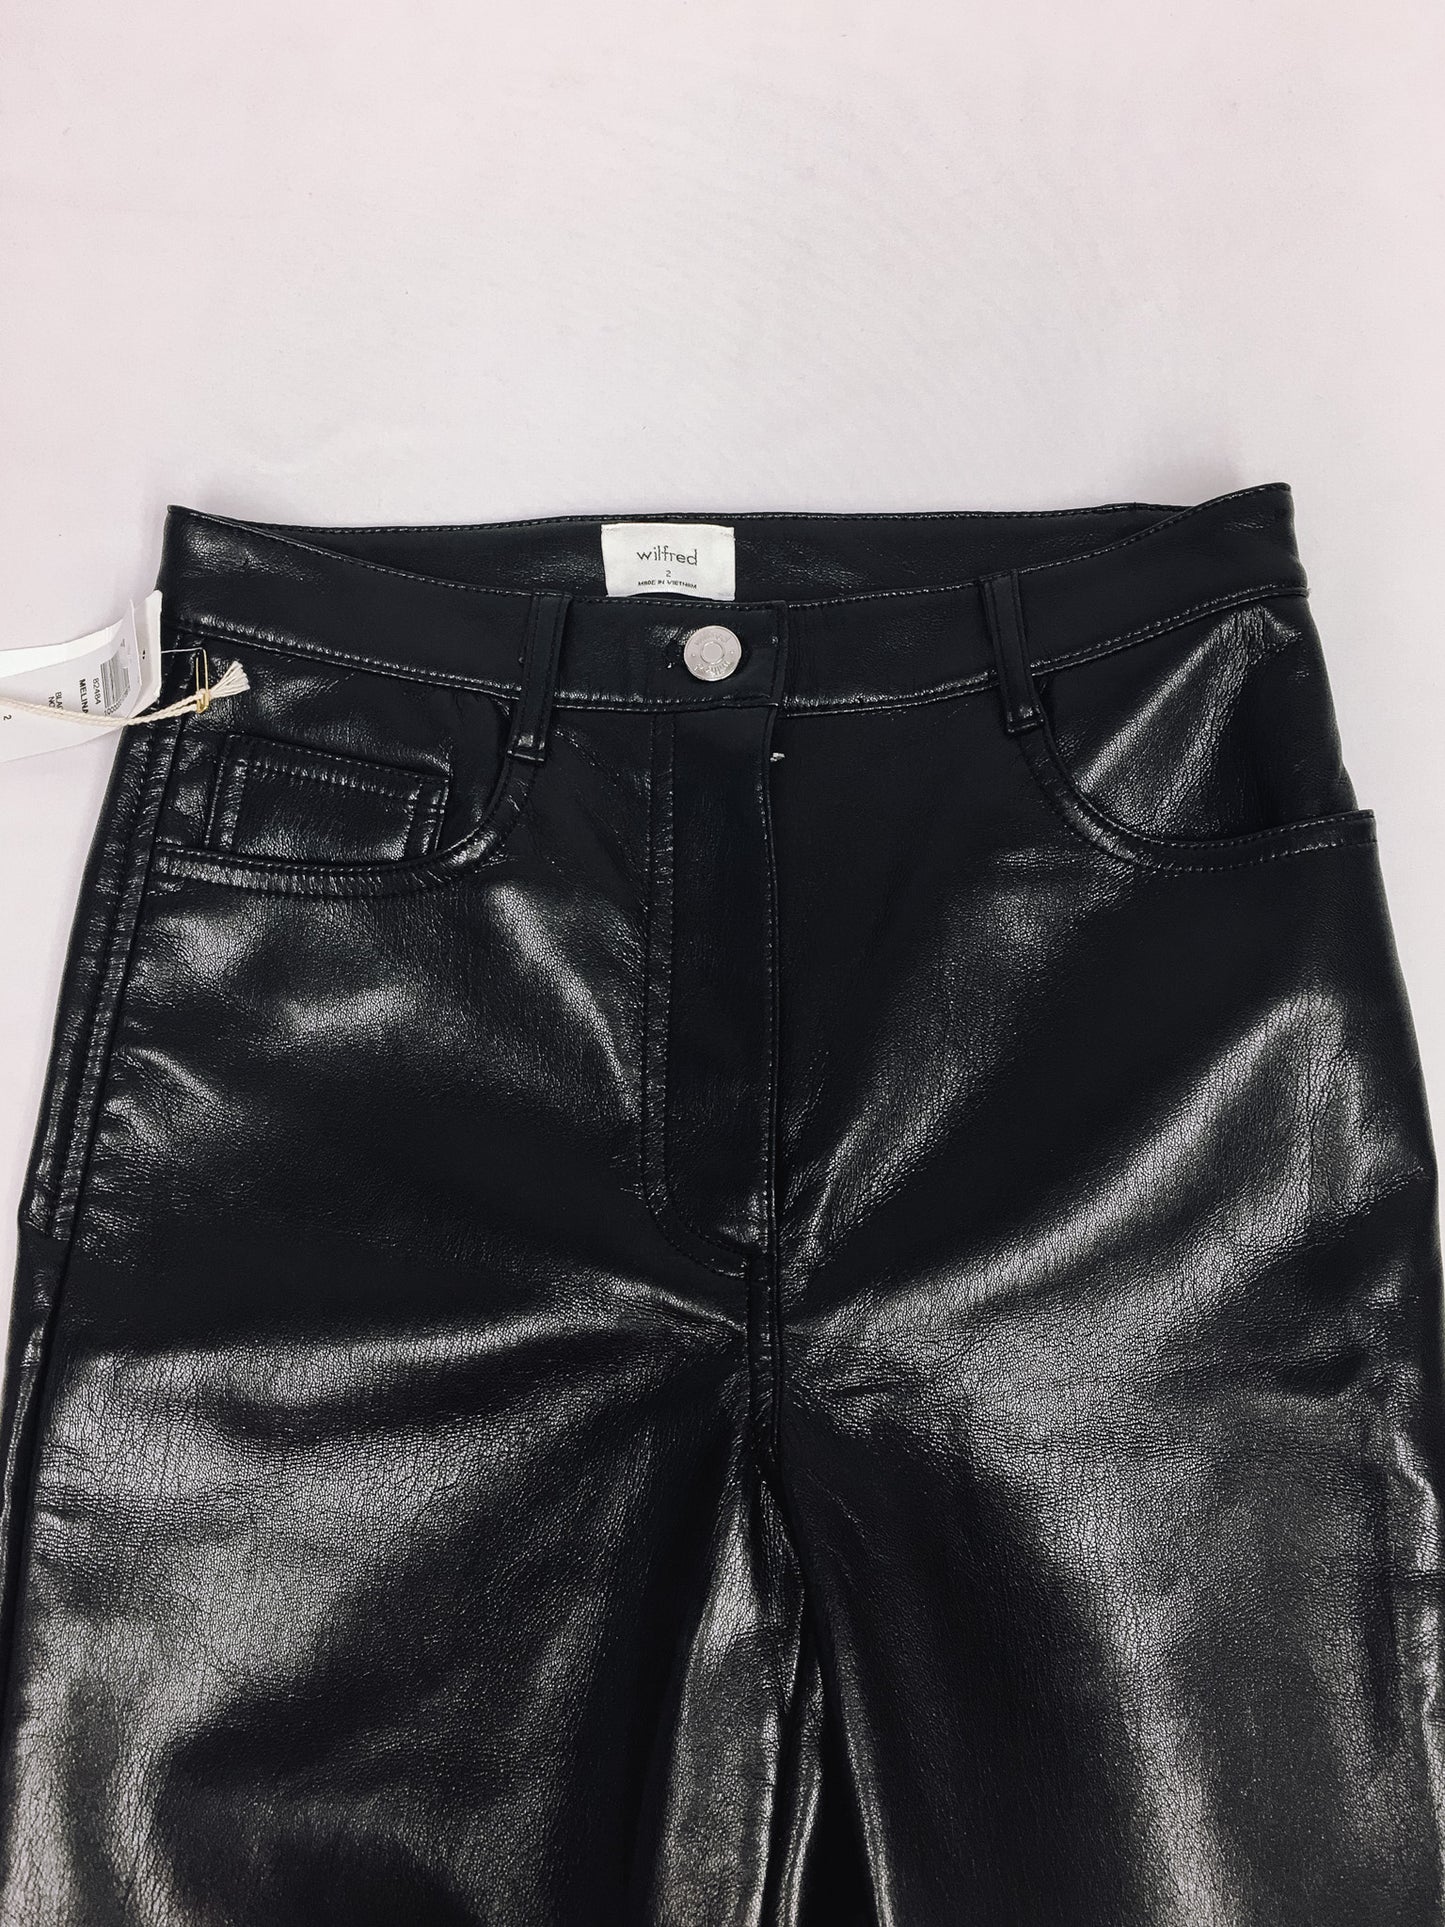 NWT Wilfred by Aritzia Melina Faux Black Leather Pants, Sz. 2